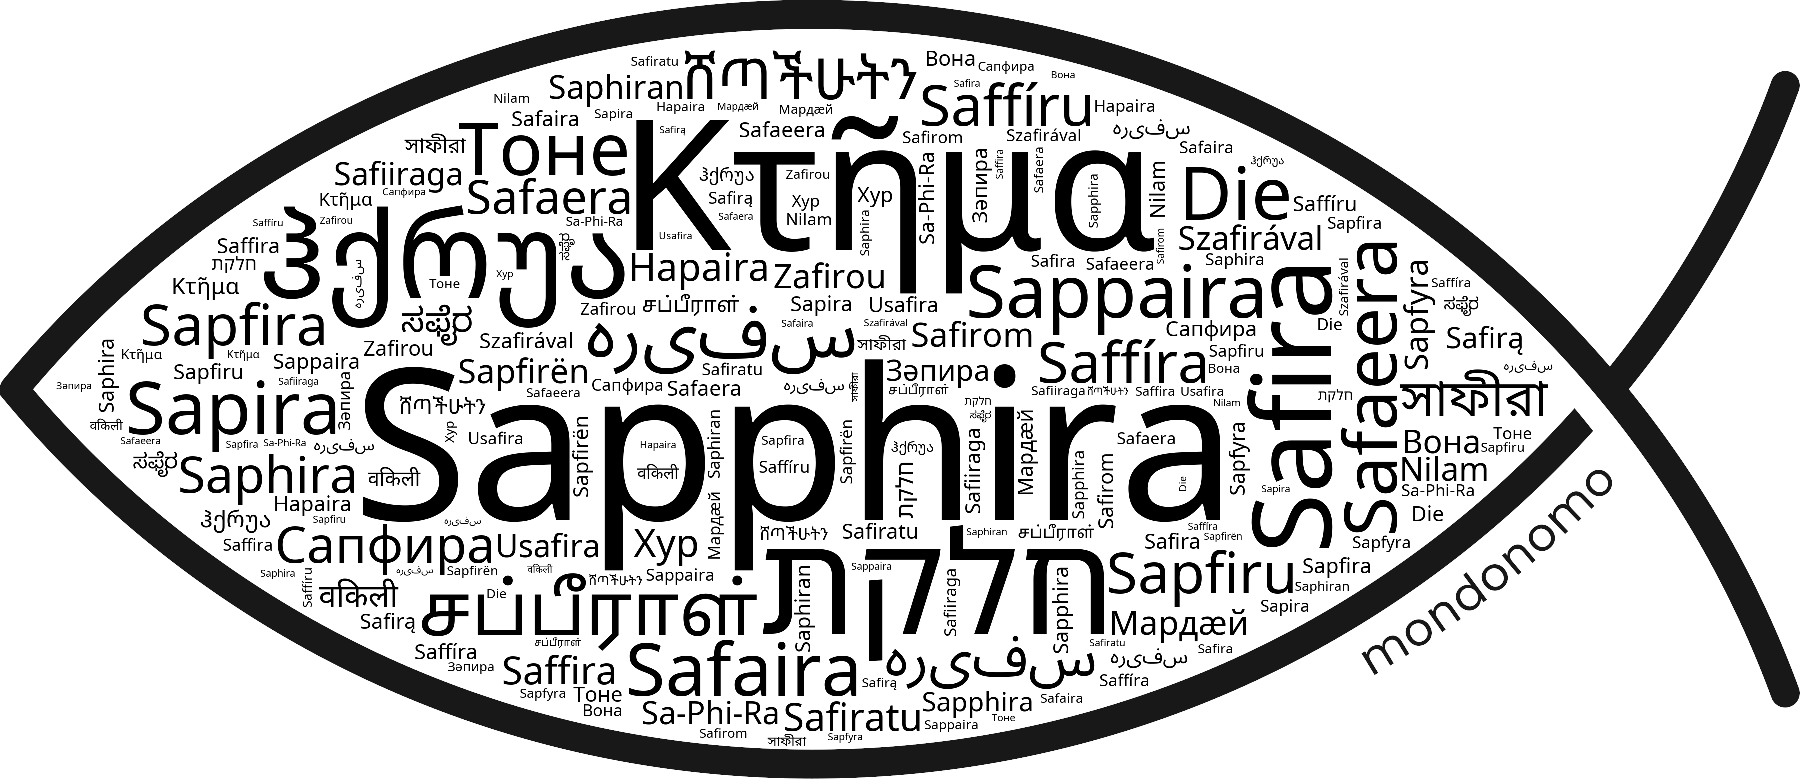 Name Sapphira in the world's Bibles